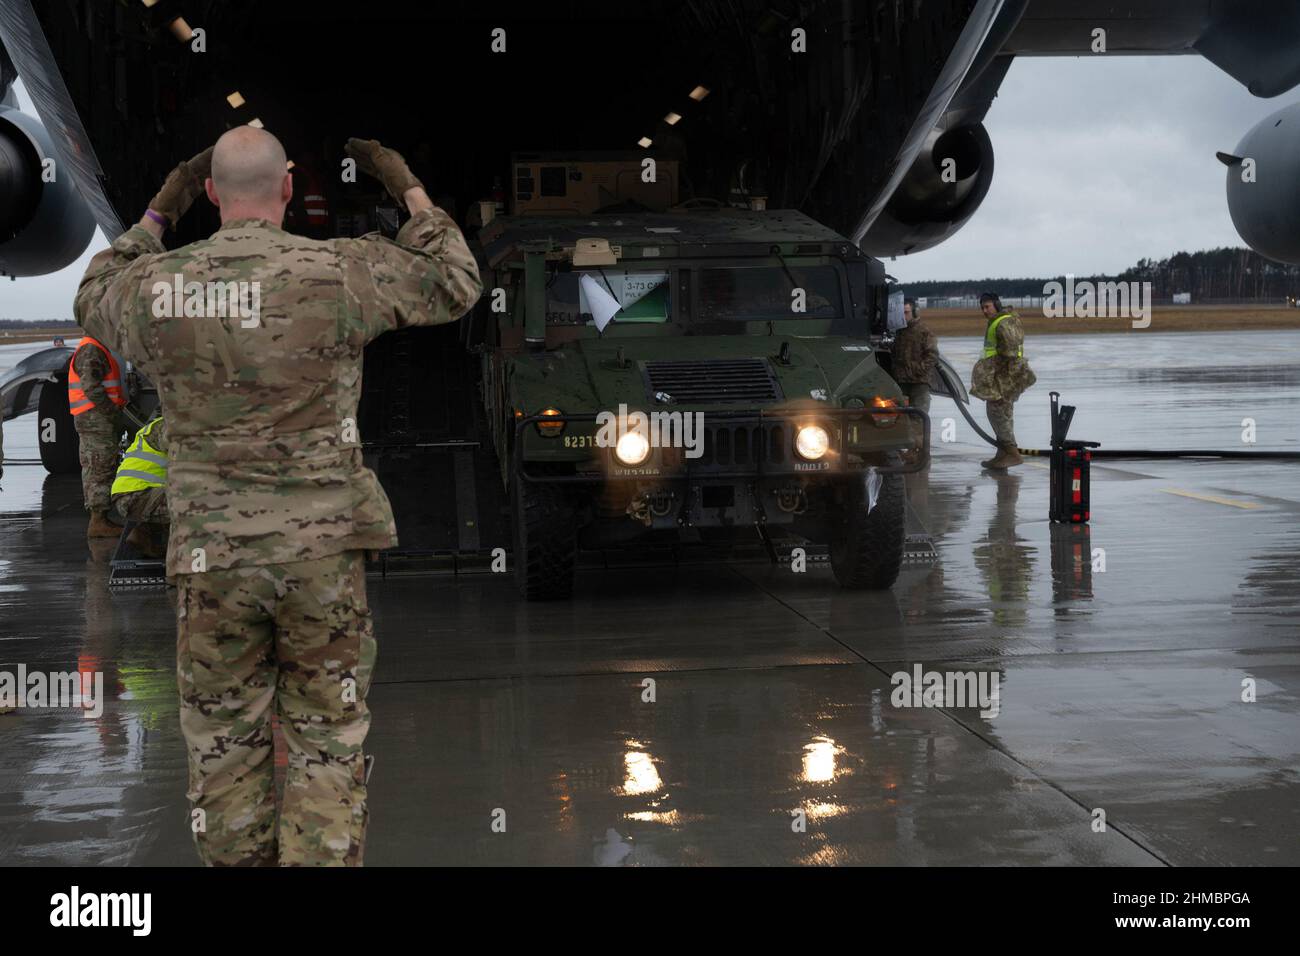 Jasionka, Poland. 08th Feb, 2022. A U.S. Air Force Airman marshals a U.S. Army Humvee out of a C-17 Globemaster III aircraft assigned to the 62nd Airlift Wing from Joint Base Lewis-McChord, Washington, in Rzeszów-Jasionka Airport, Poland, on February 7, 2022. U.S. personnel and equipment arrived to support NATO Allies and partners in order to improve a collective readiness, interoperability, and relationships. Photo by Senior Airman Taylor Slater/U.S. Air Force/UPI Credit: UPI/Alamy Live News Stock Photo